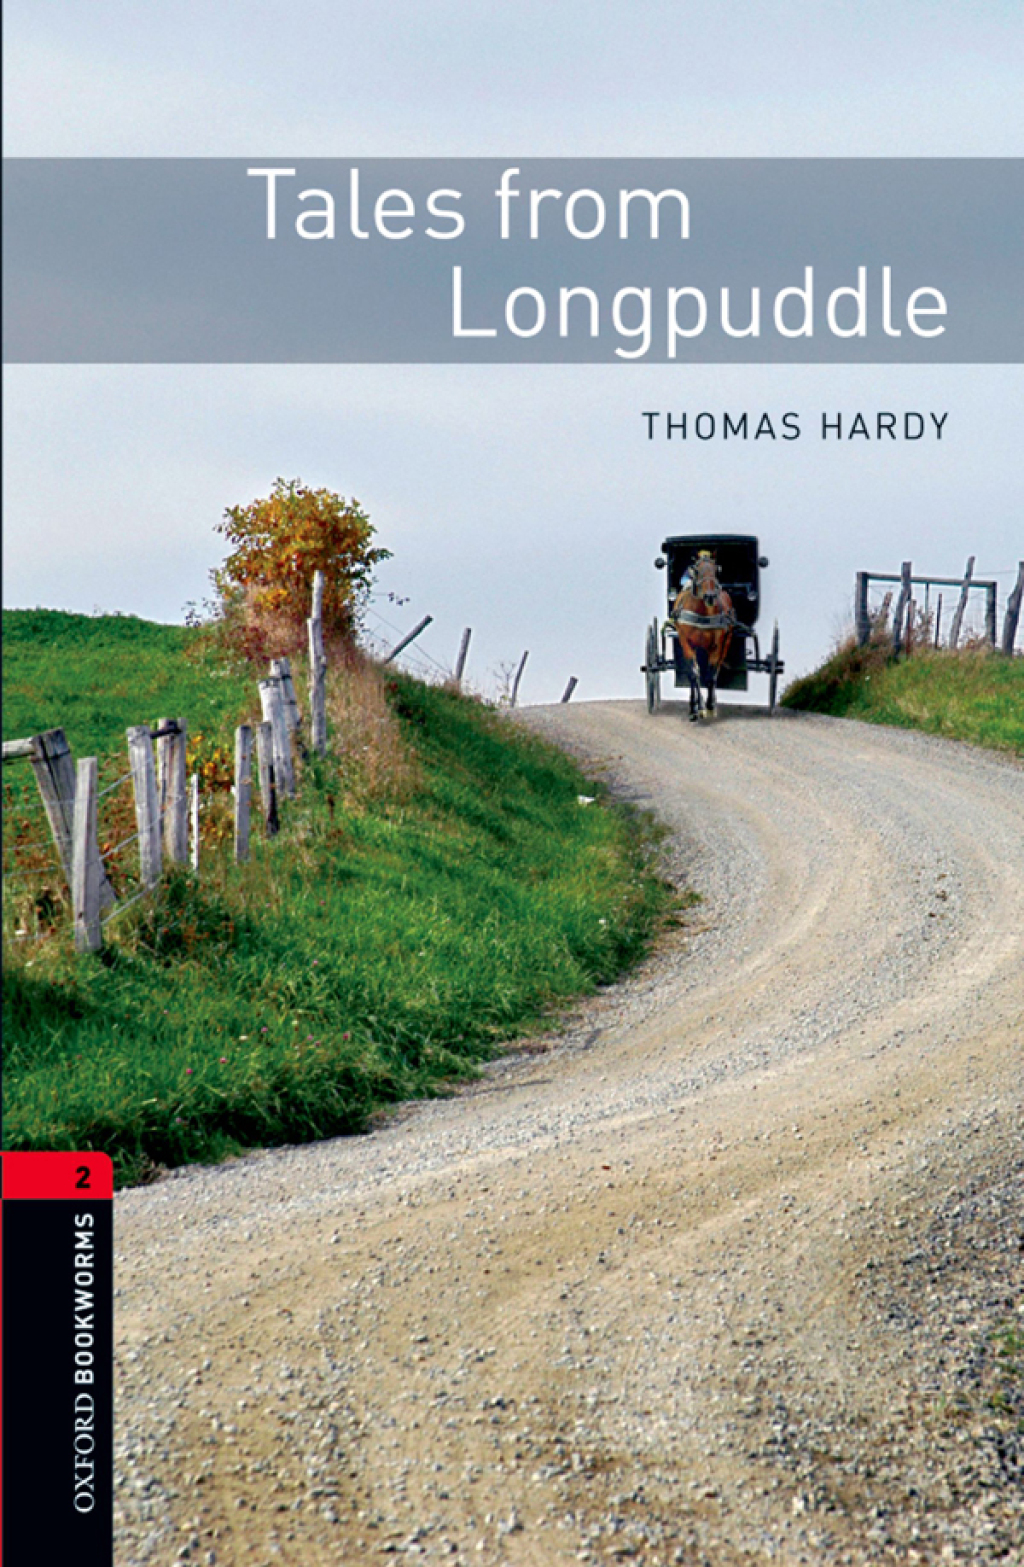 Tales from Longpuddle Level 2 Oxford Bookworms Library - 3rd Edition (eBook Rental)